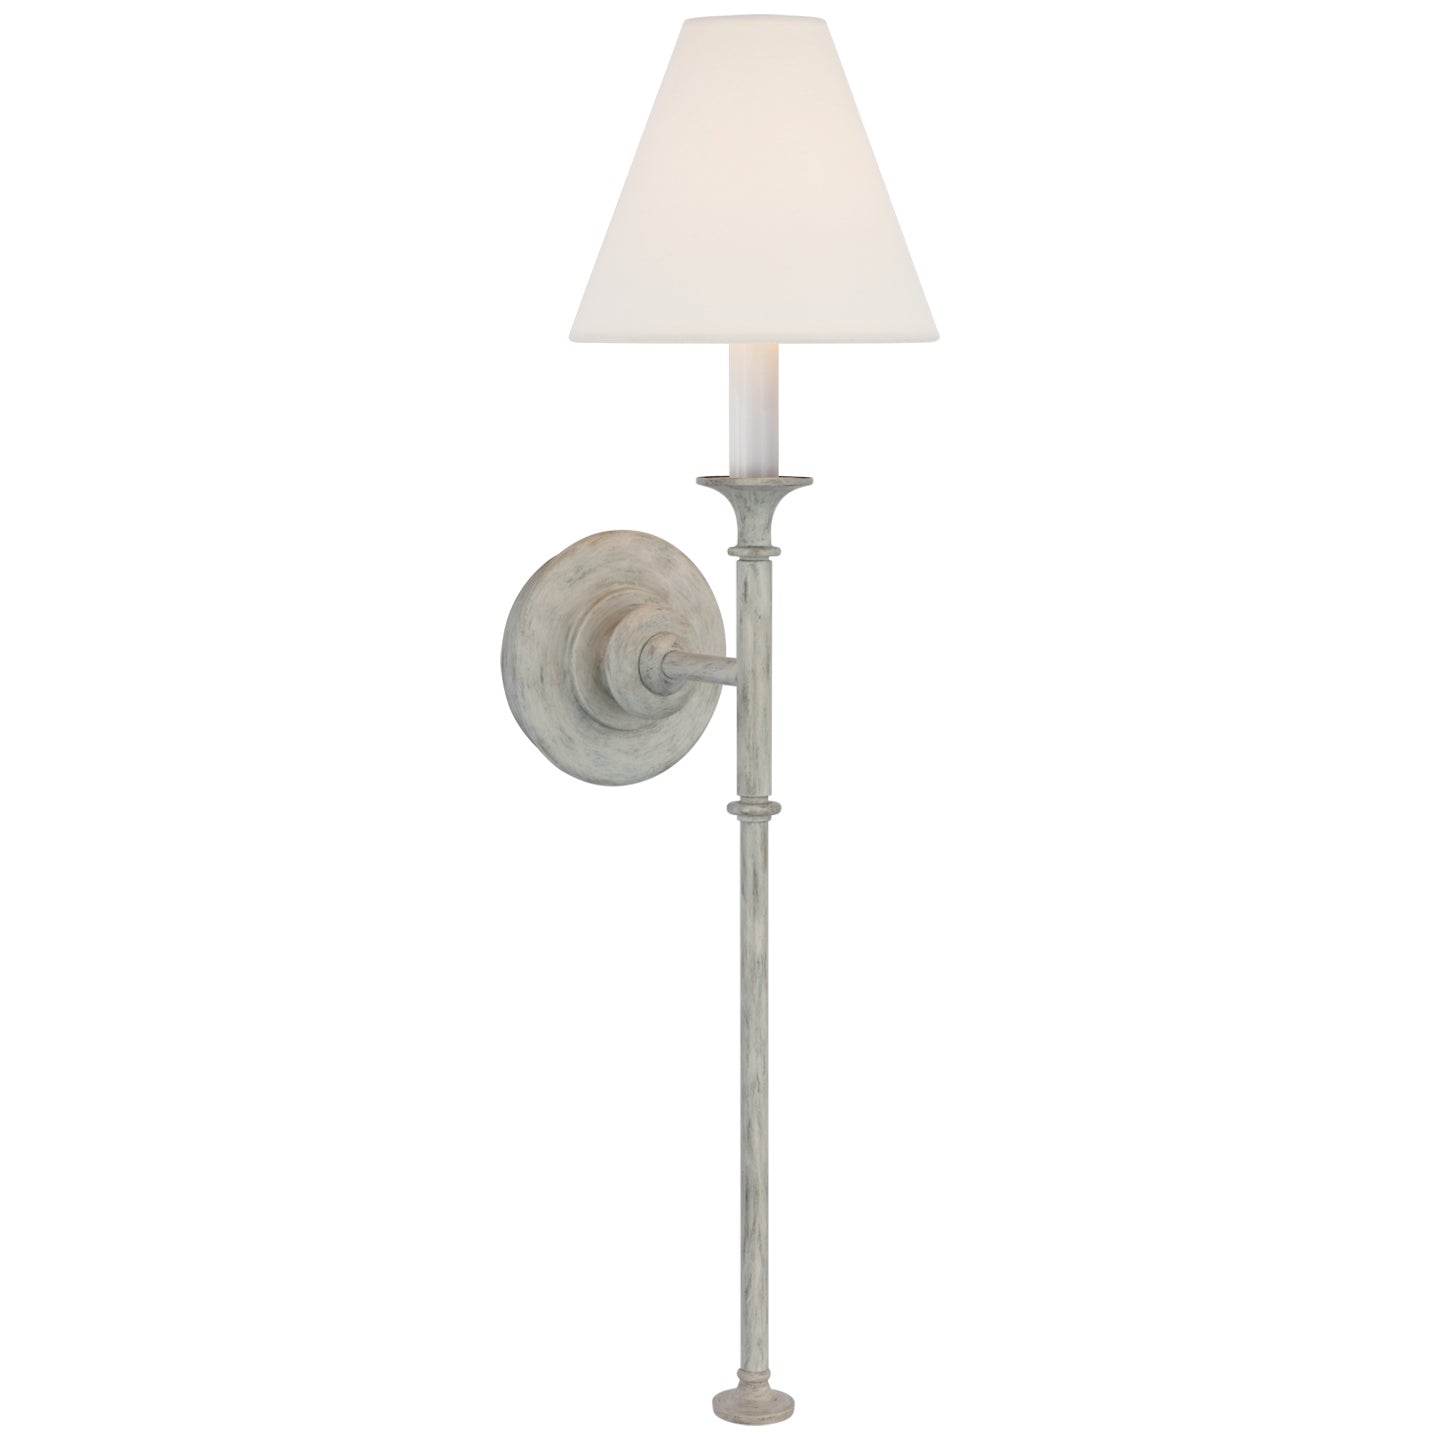 Load image into Gallery viewer, Visual Comfort Signature - TOB 2453SG-L - LED Wall Sconce - Piaf - Swedish Gray
